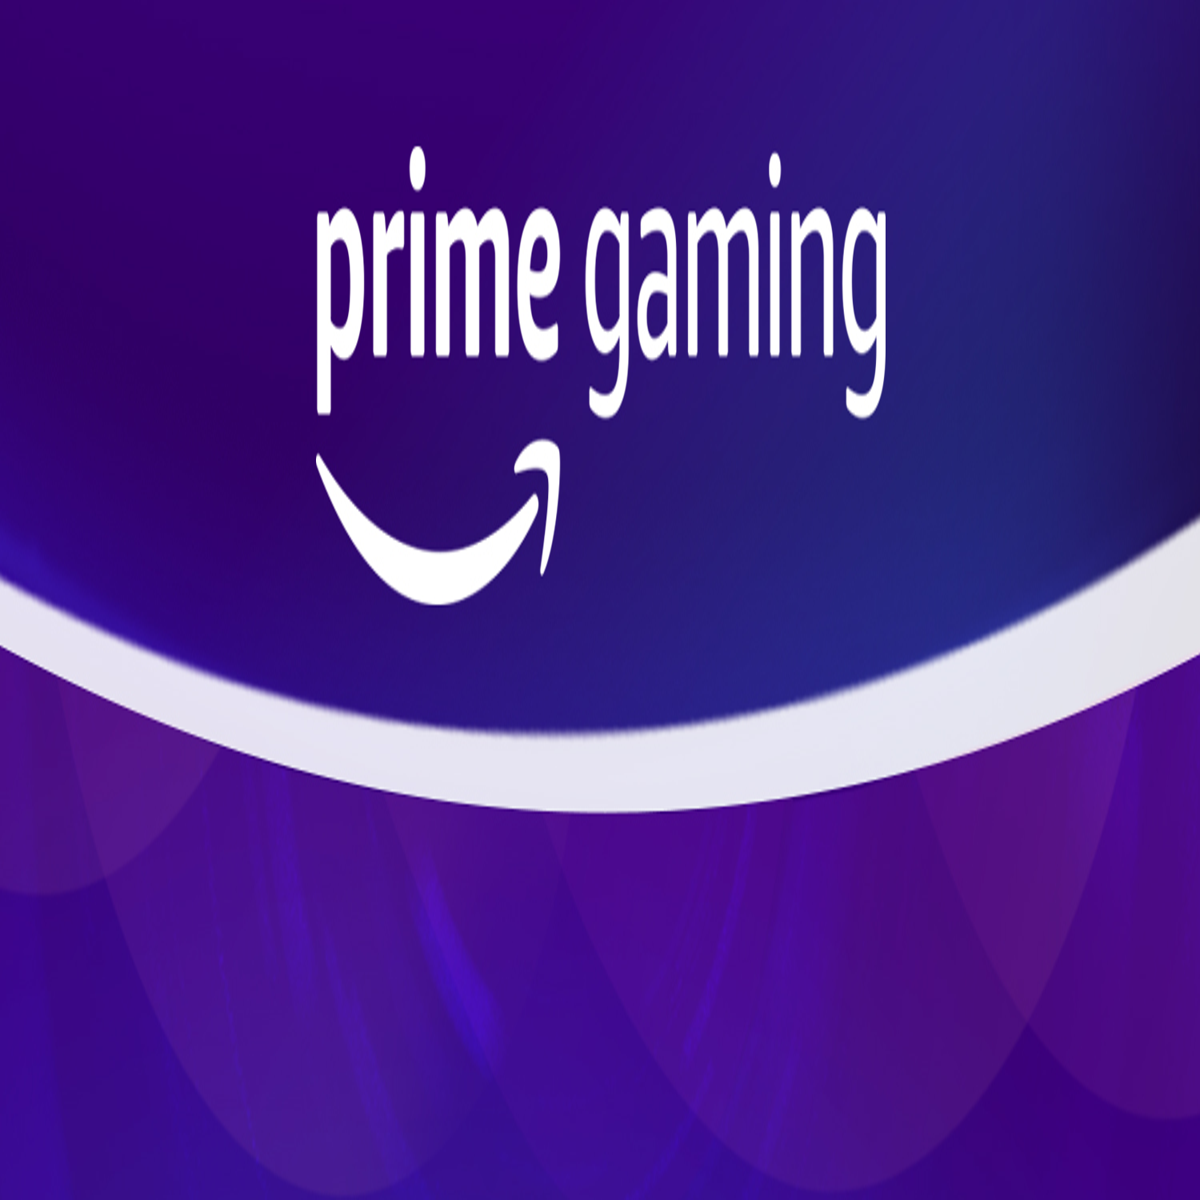 Twitch Prime Rebrands as Prime Gaming - IGN